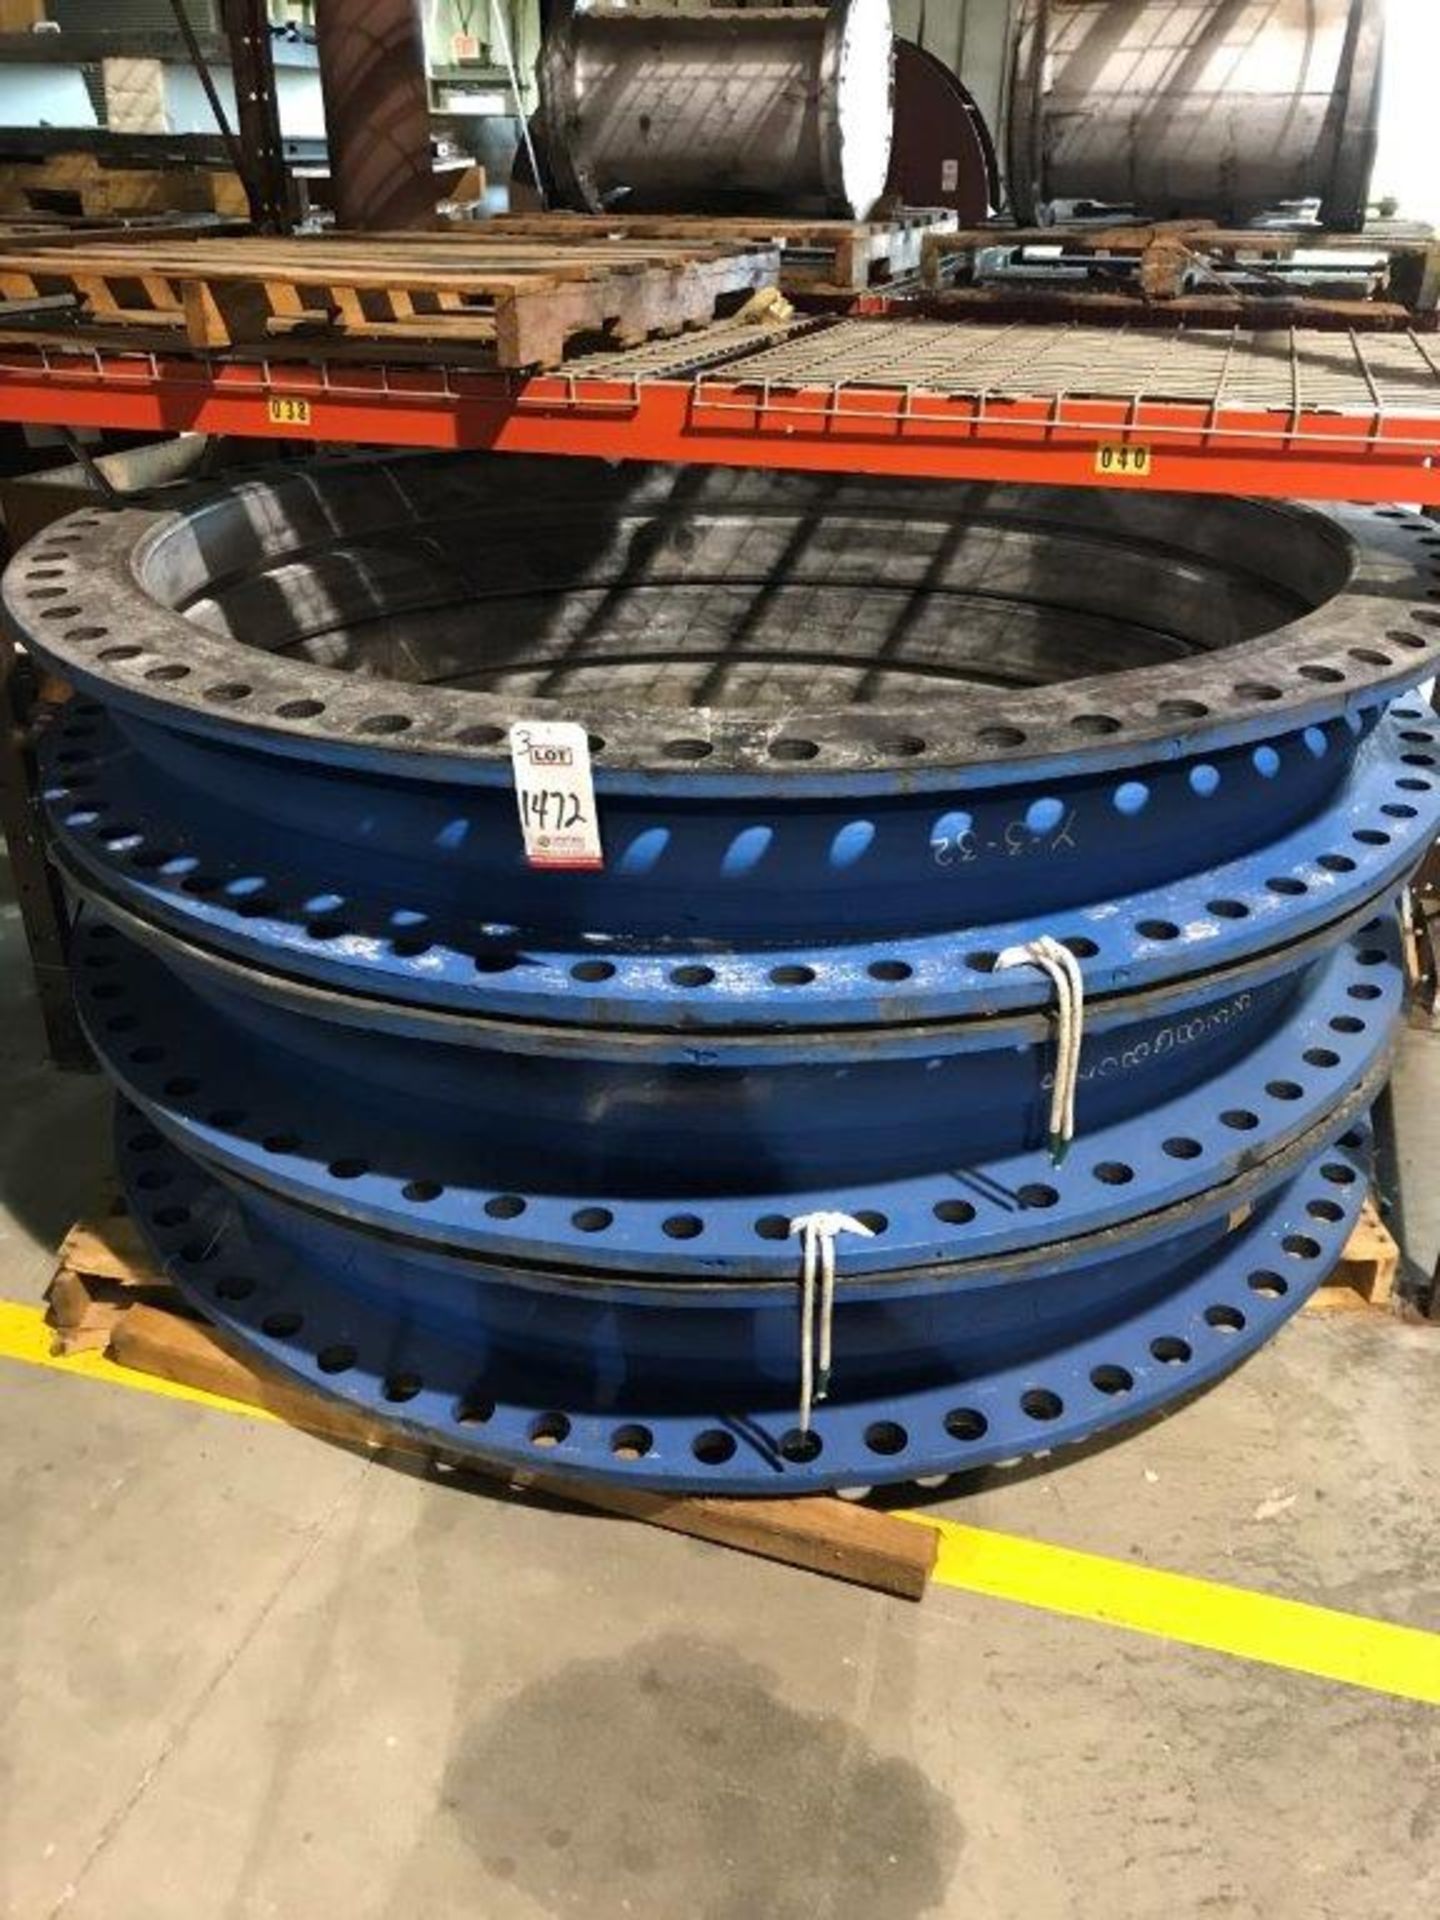 LOT - (3) GARLOCK STYLE 204HP 72" X 13-1/2" EXPANSION JOINTS (LOCATION: BUILDING 11)